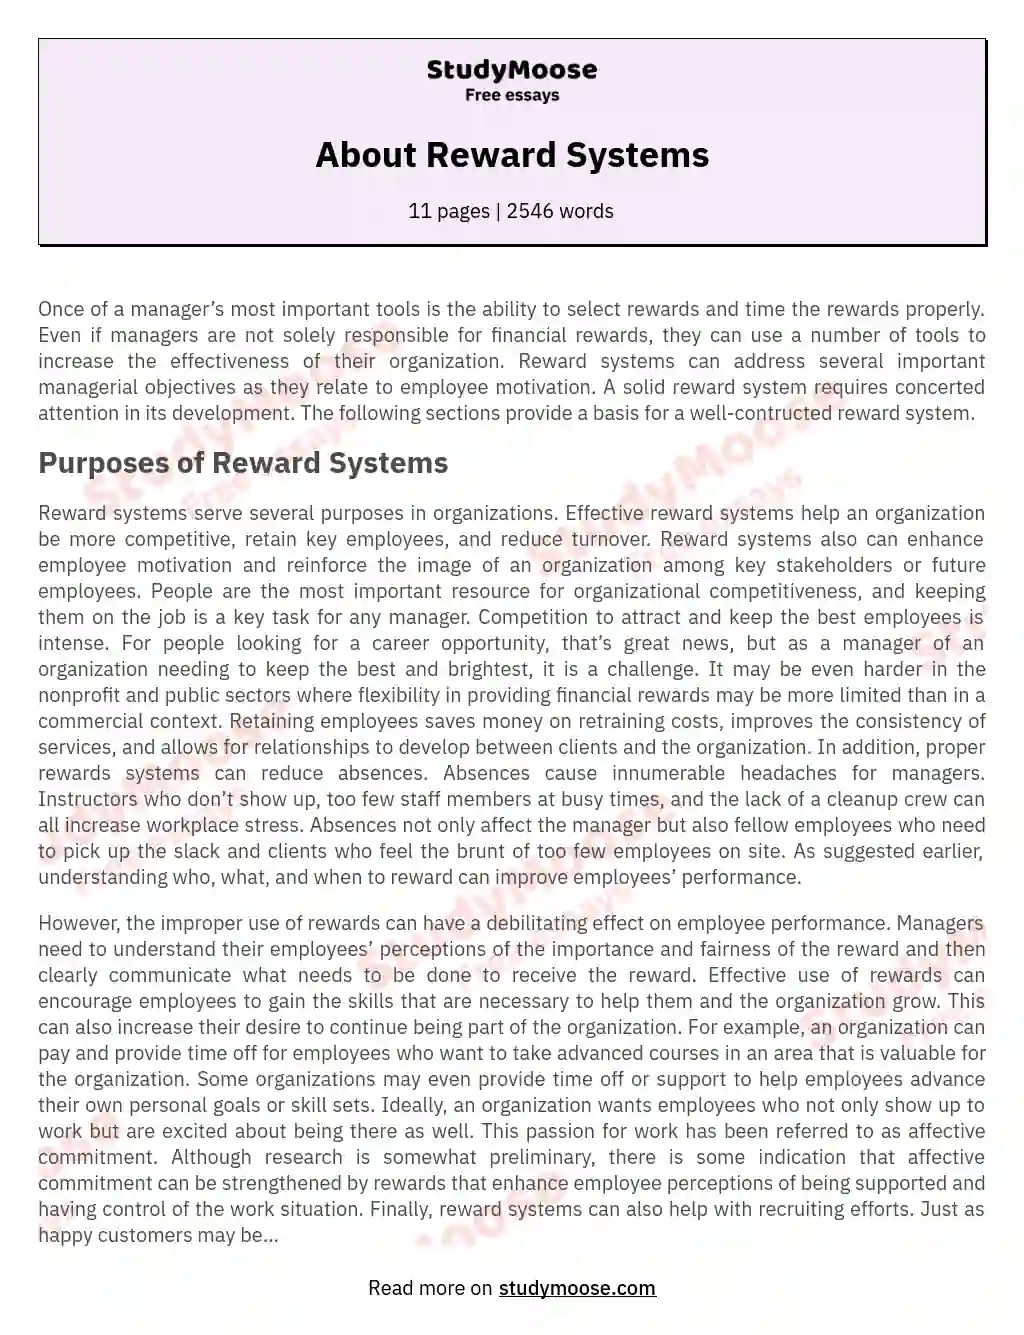 About Reward Systems